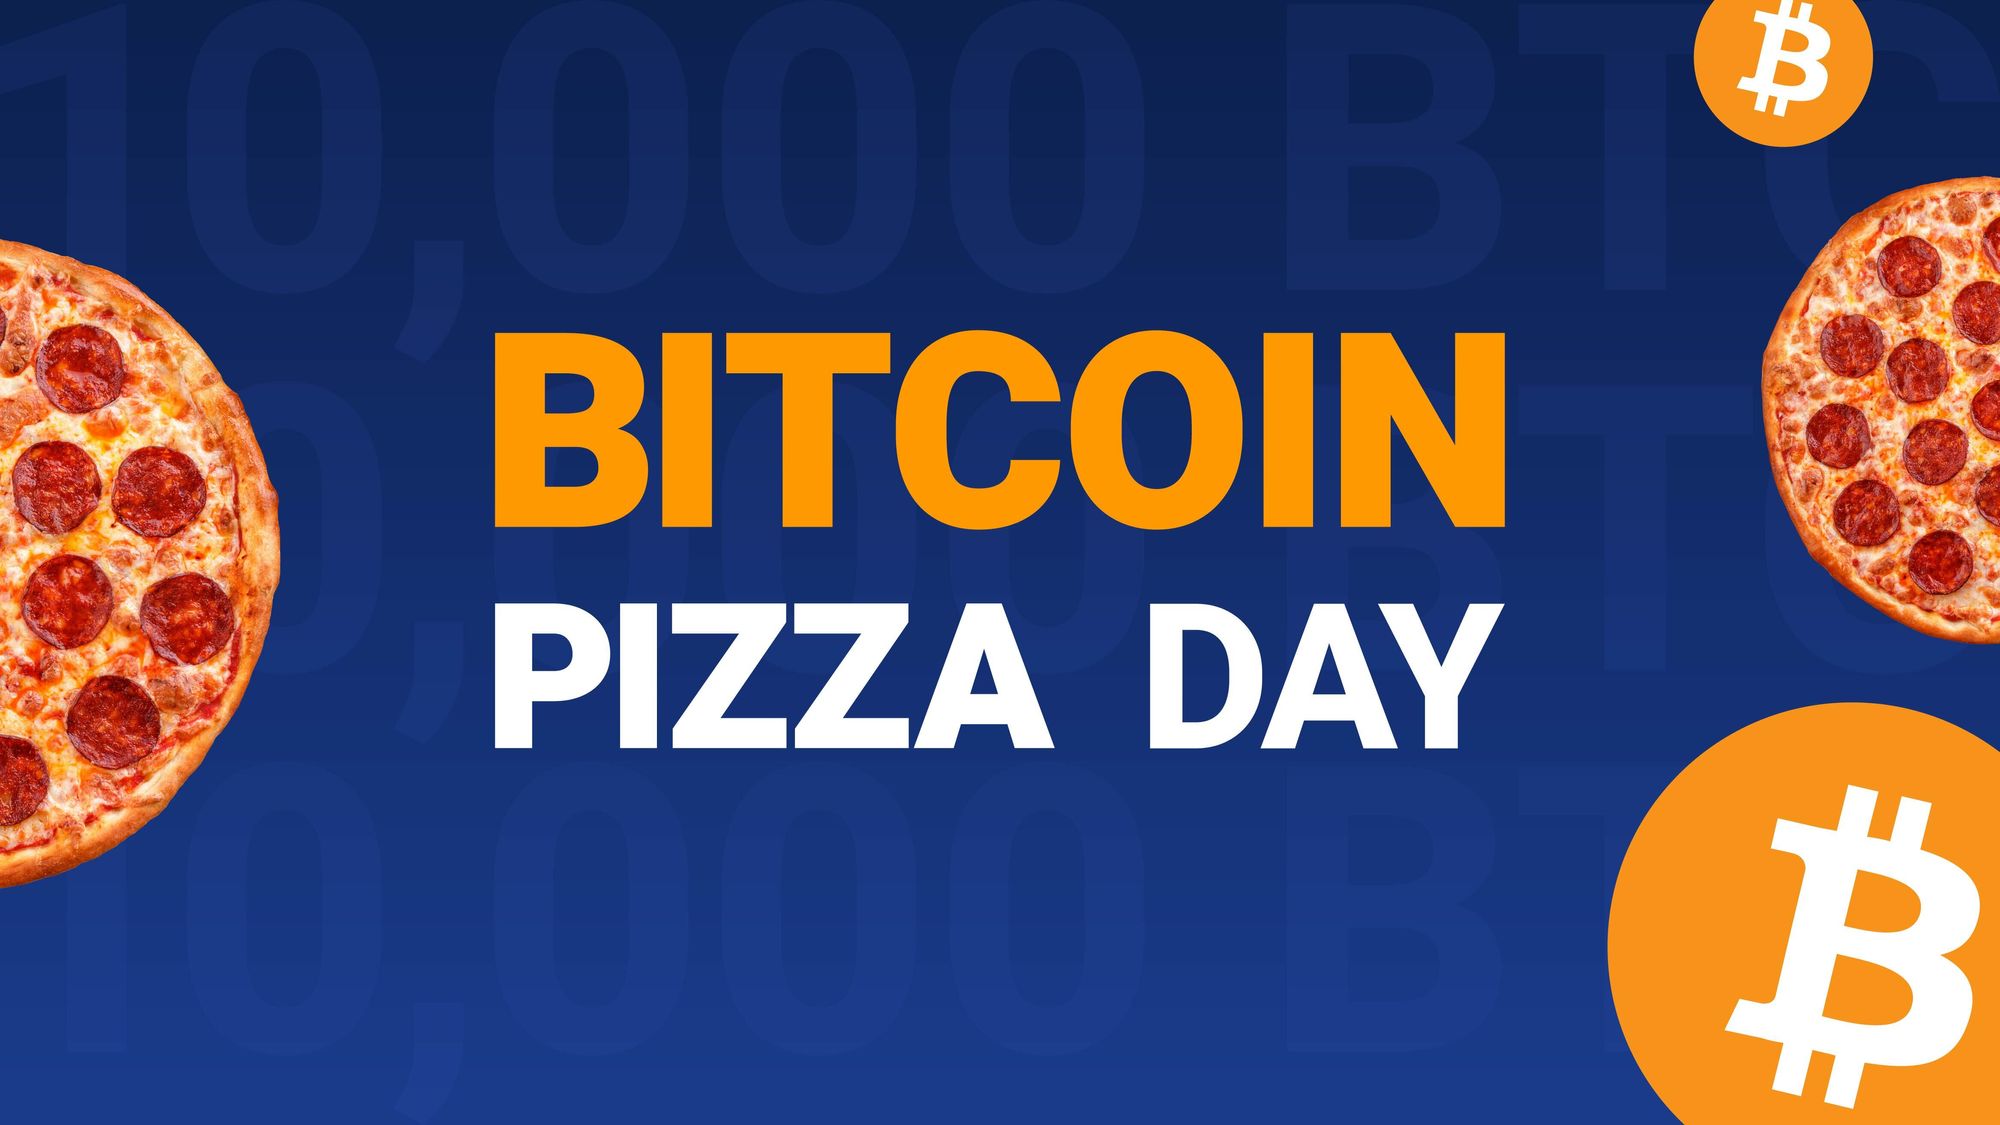 Celebrate Bitcoin Pizza Day by Ordering Pizza with Bitcoin